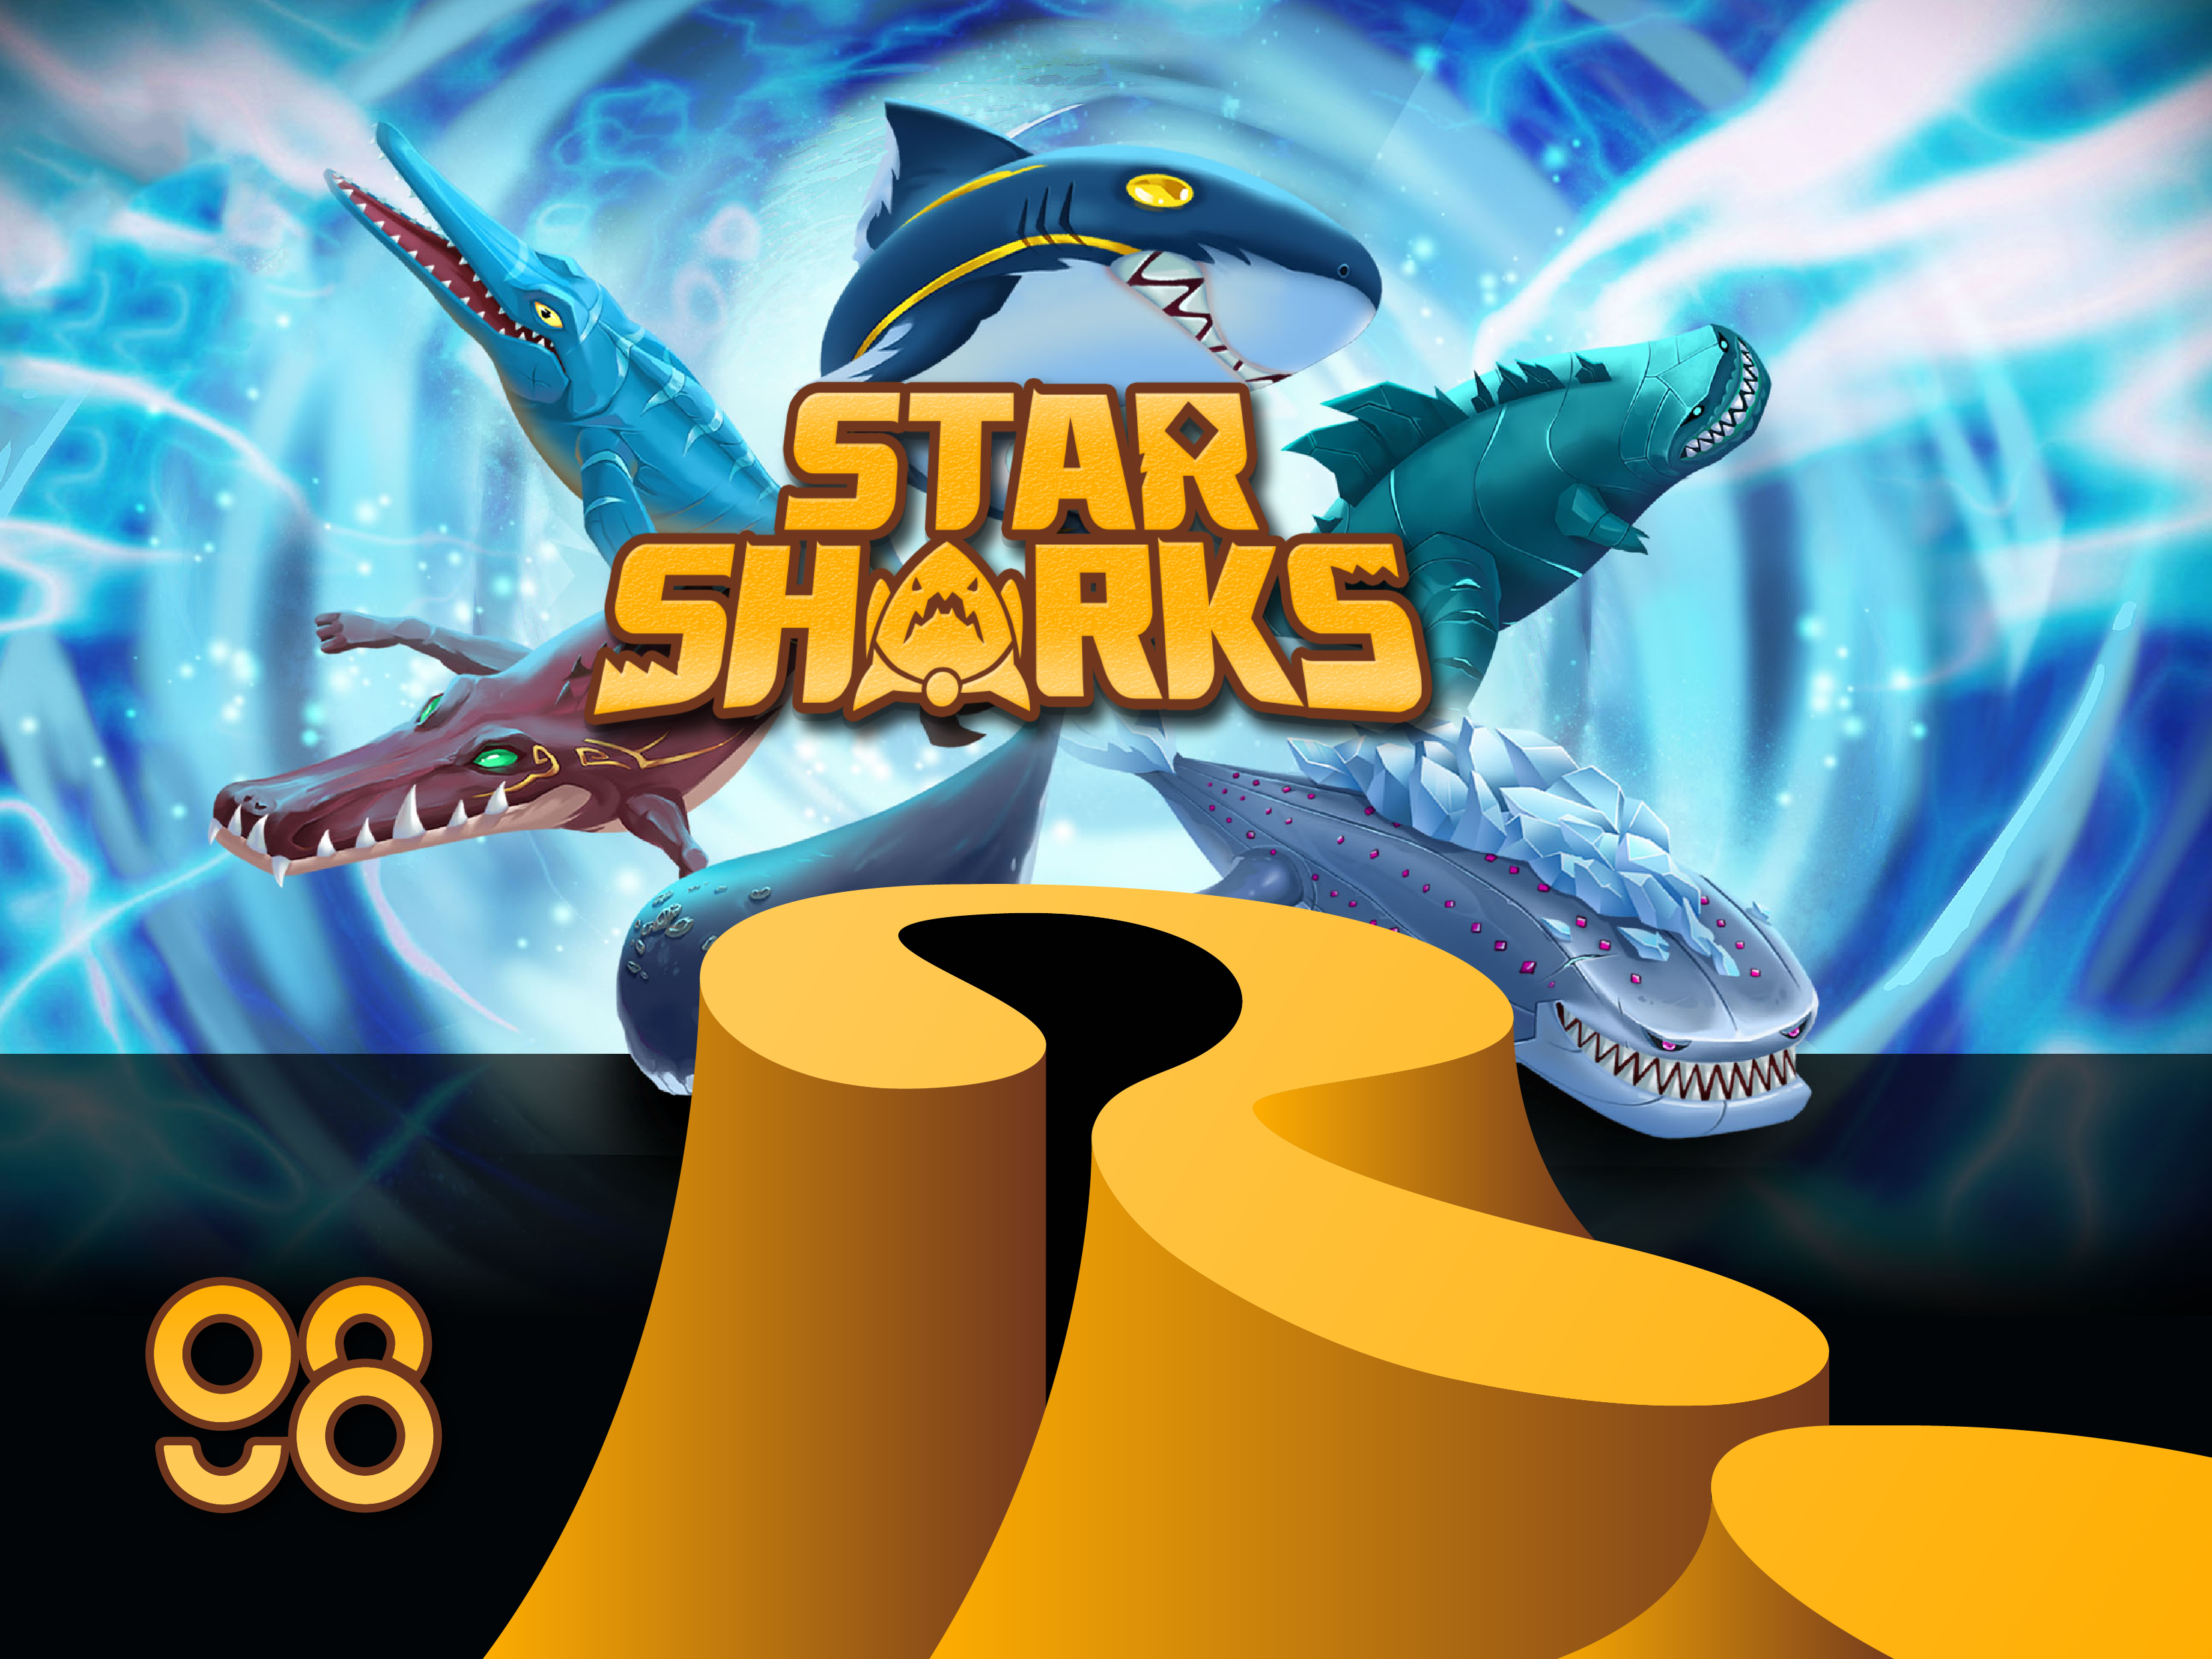 StarSharks, the Binance-Backed Shark Metaverse, Launches Its First  Turn-Based Card Game, StarSharks.Warriors - The Daily Hodl